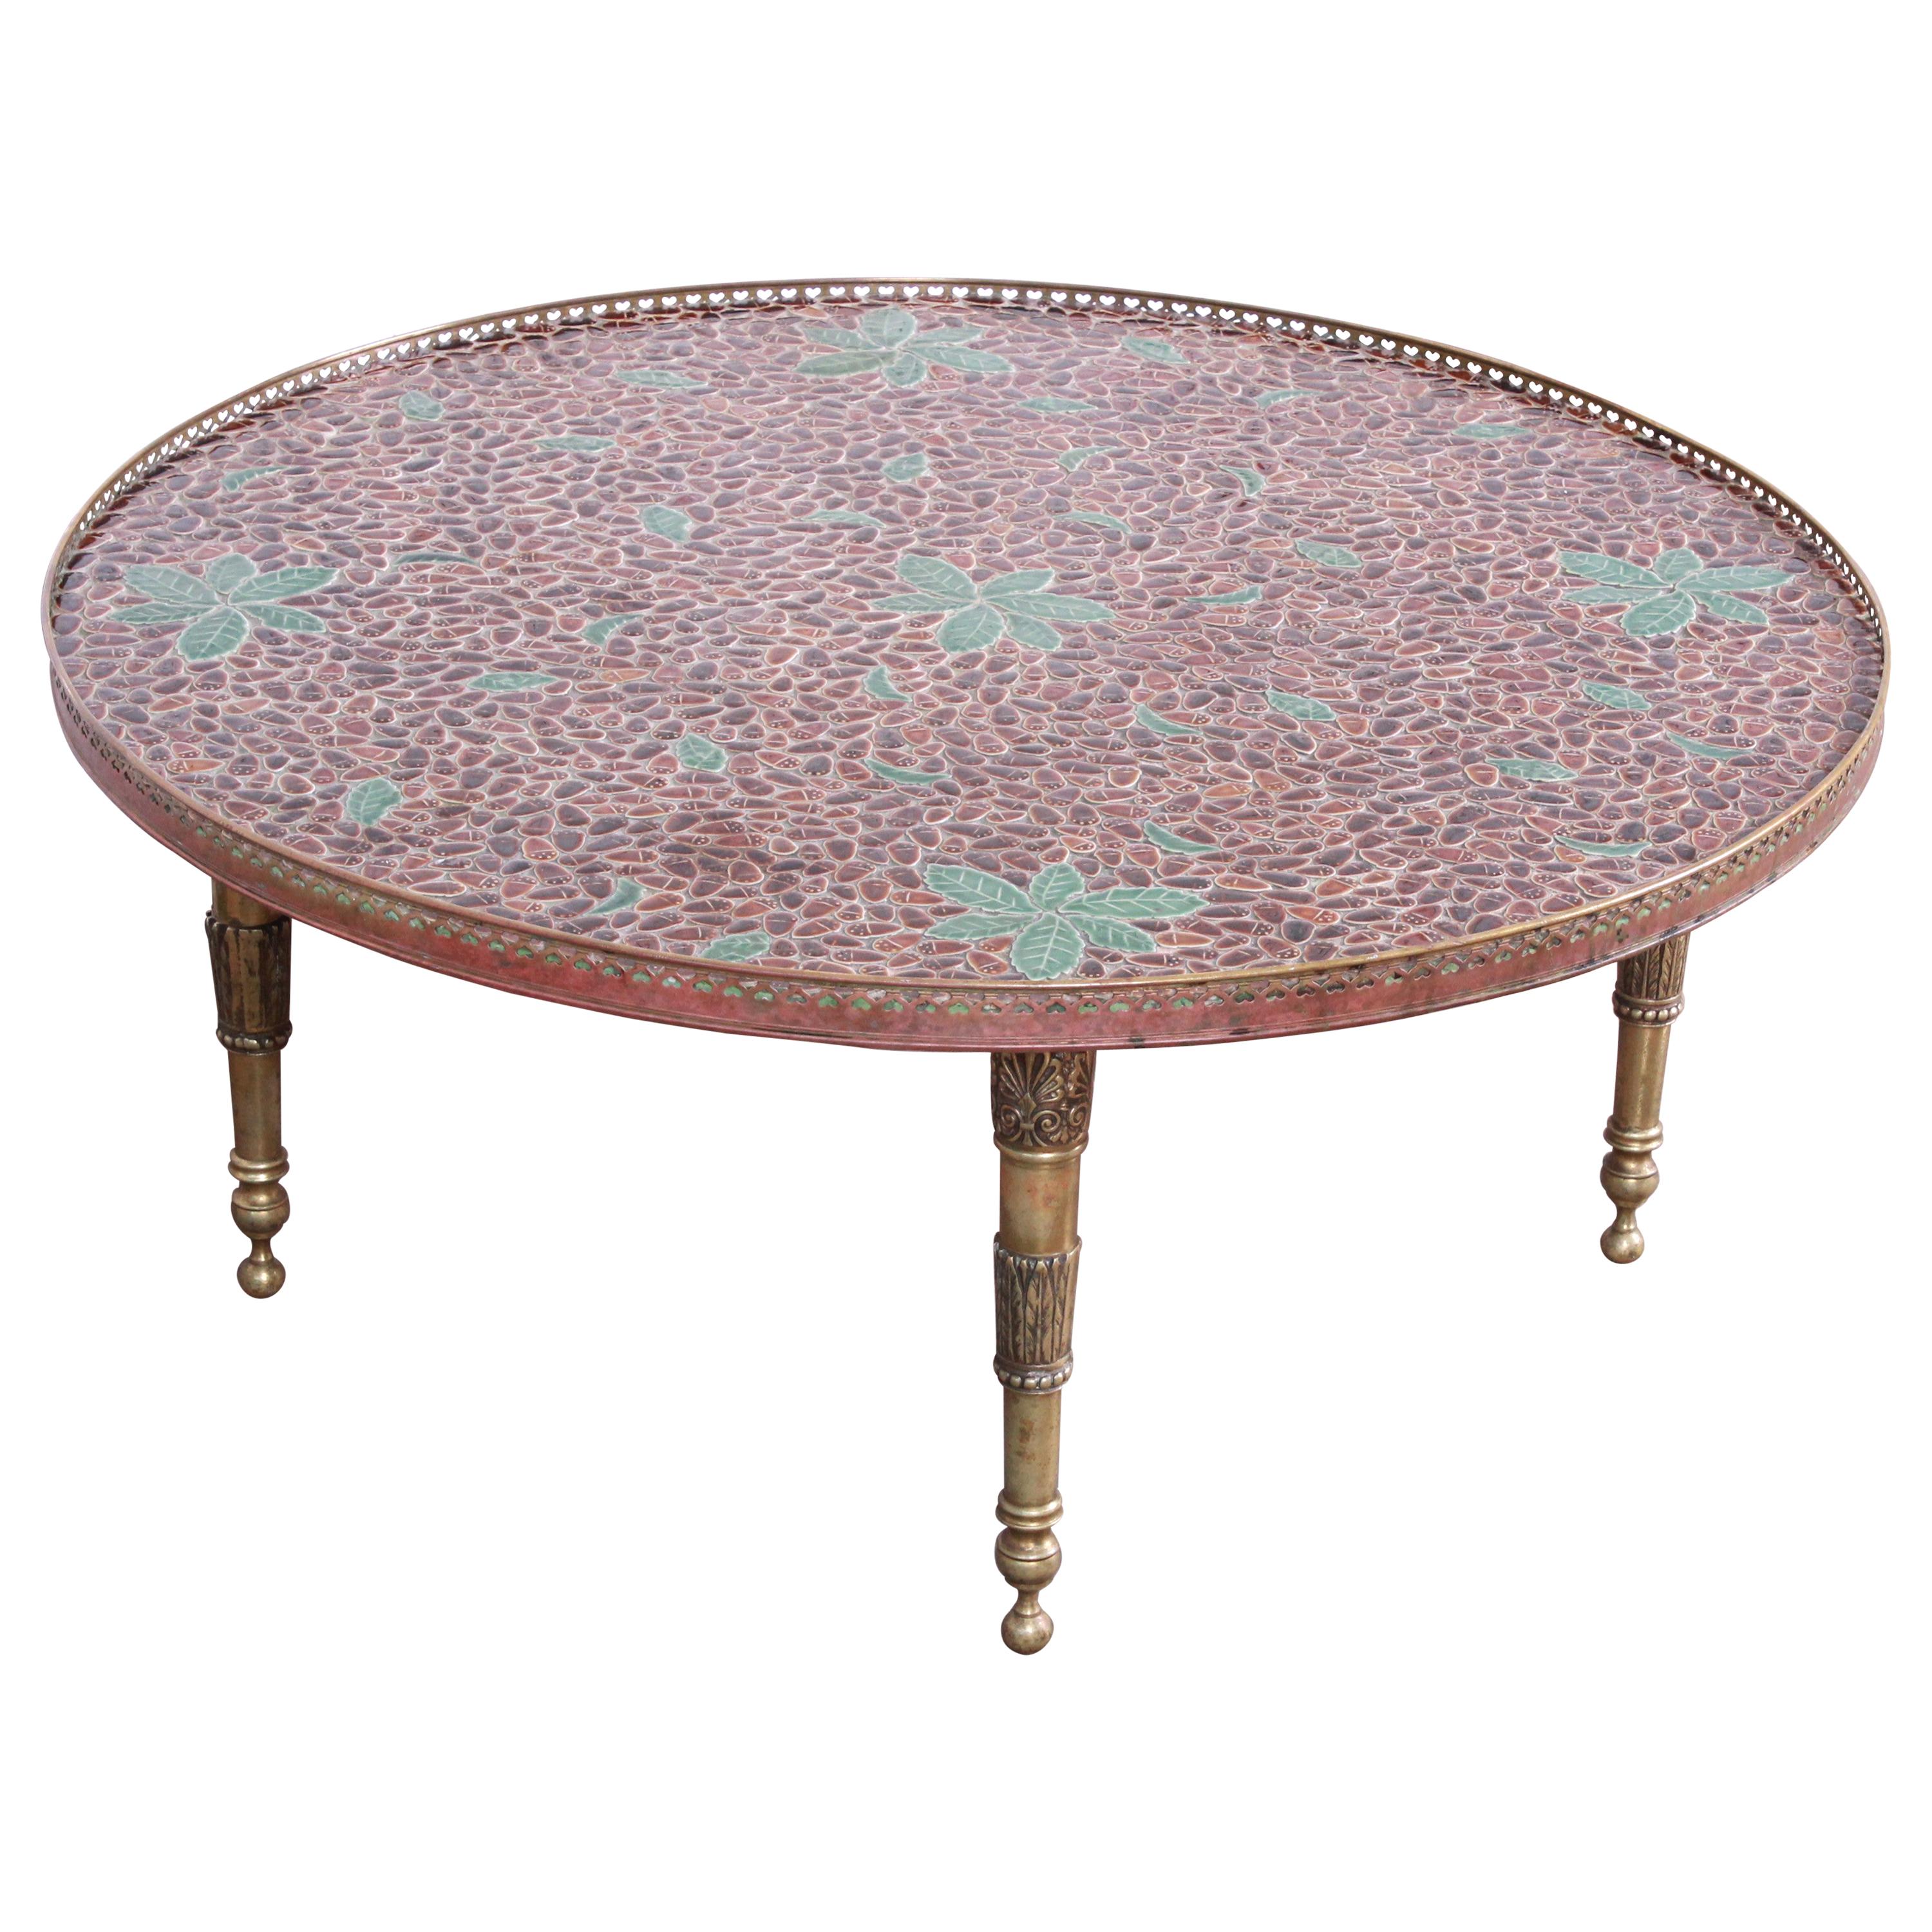 Mid-Century Modern Italian Mosaic Tile and Brass Cocktail Table, 1950s